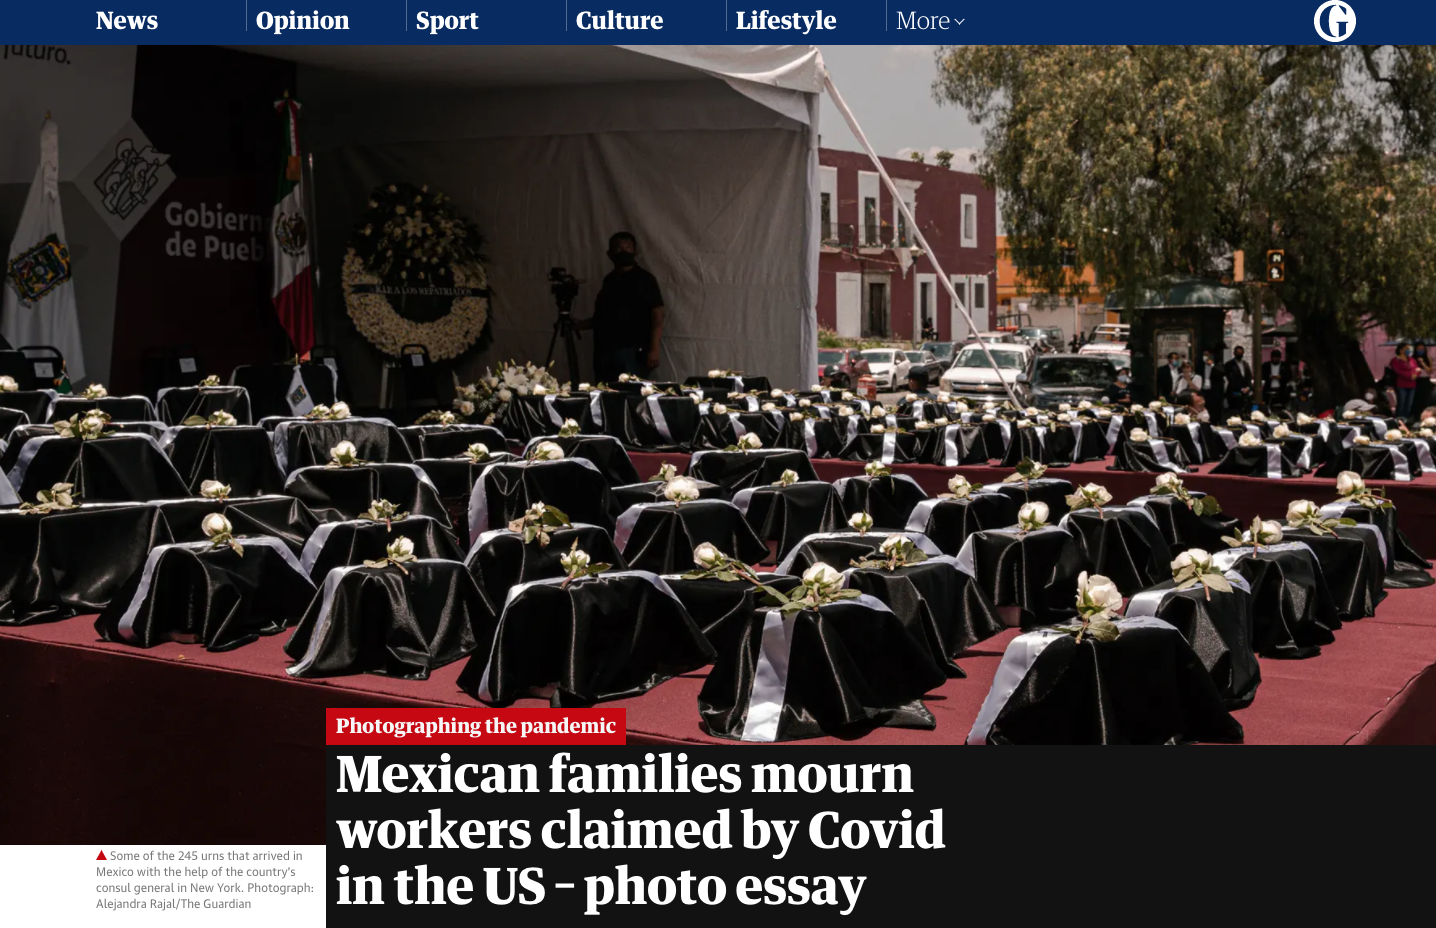 Thumbnail of Mexican families mourn workers claimed by Covid in the US